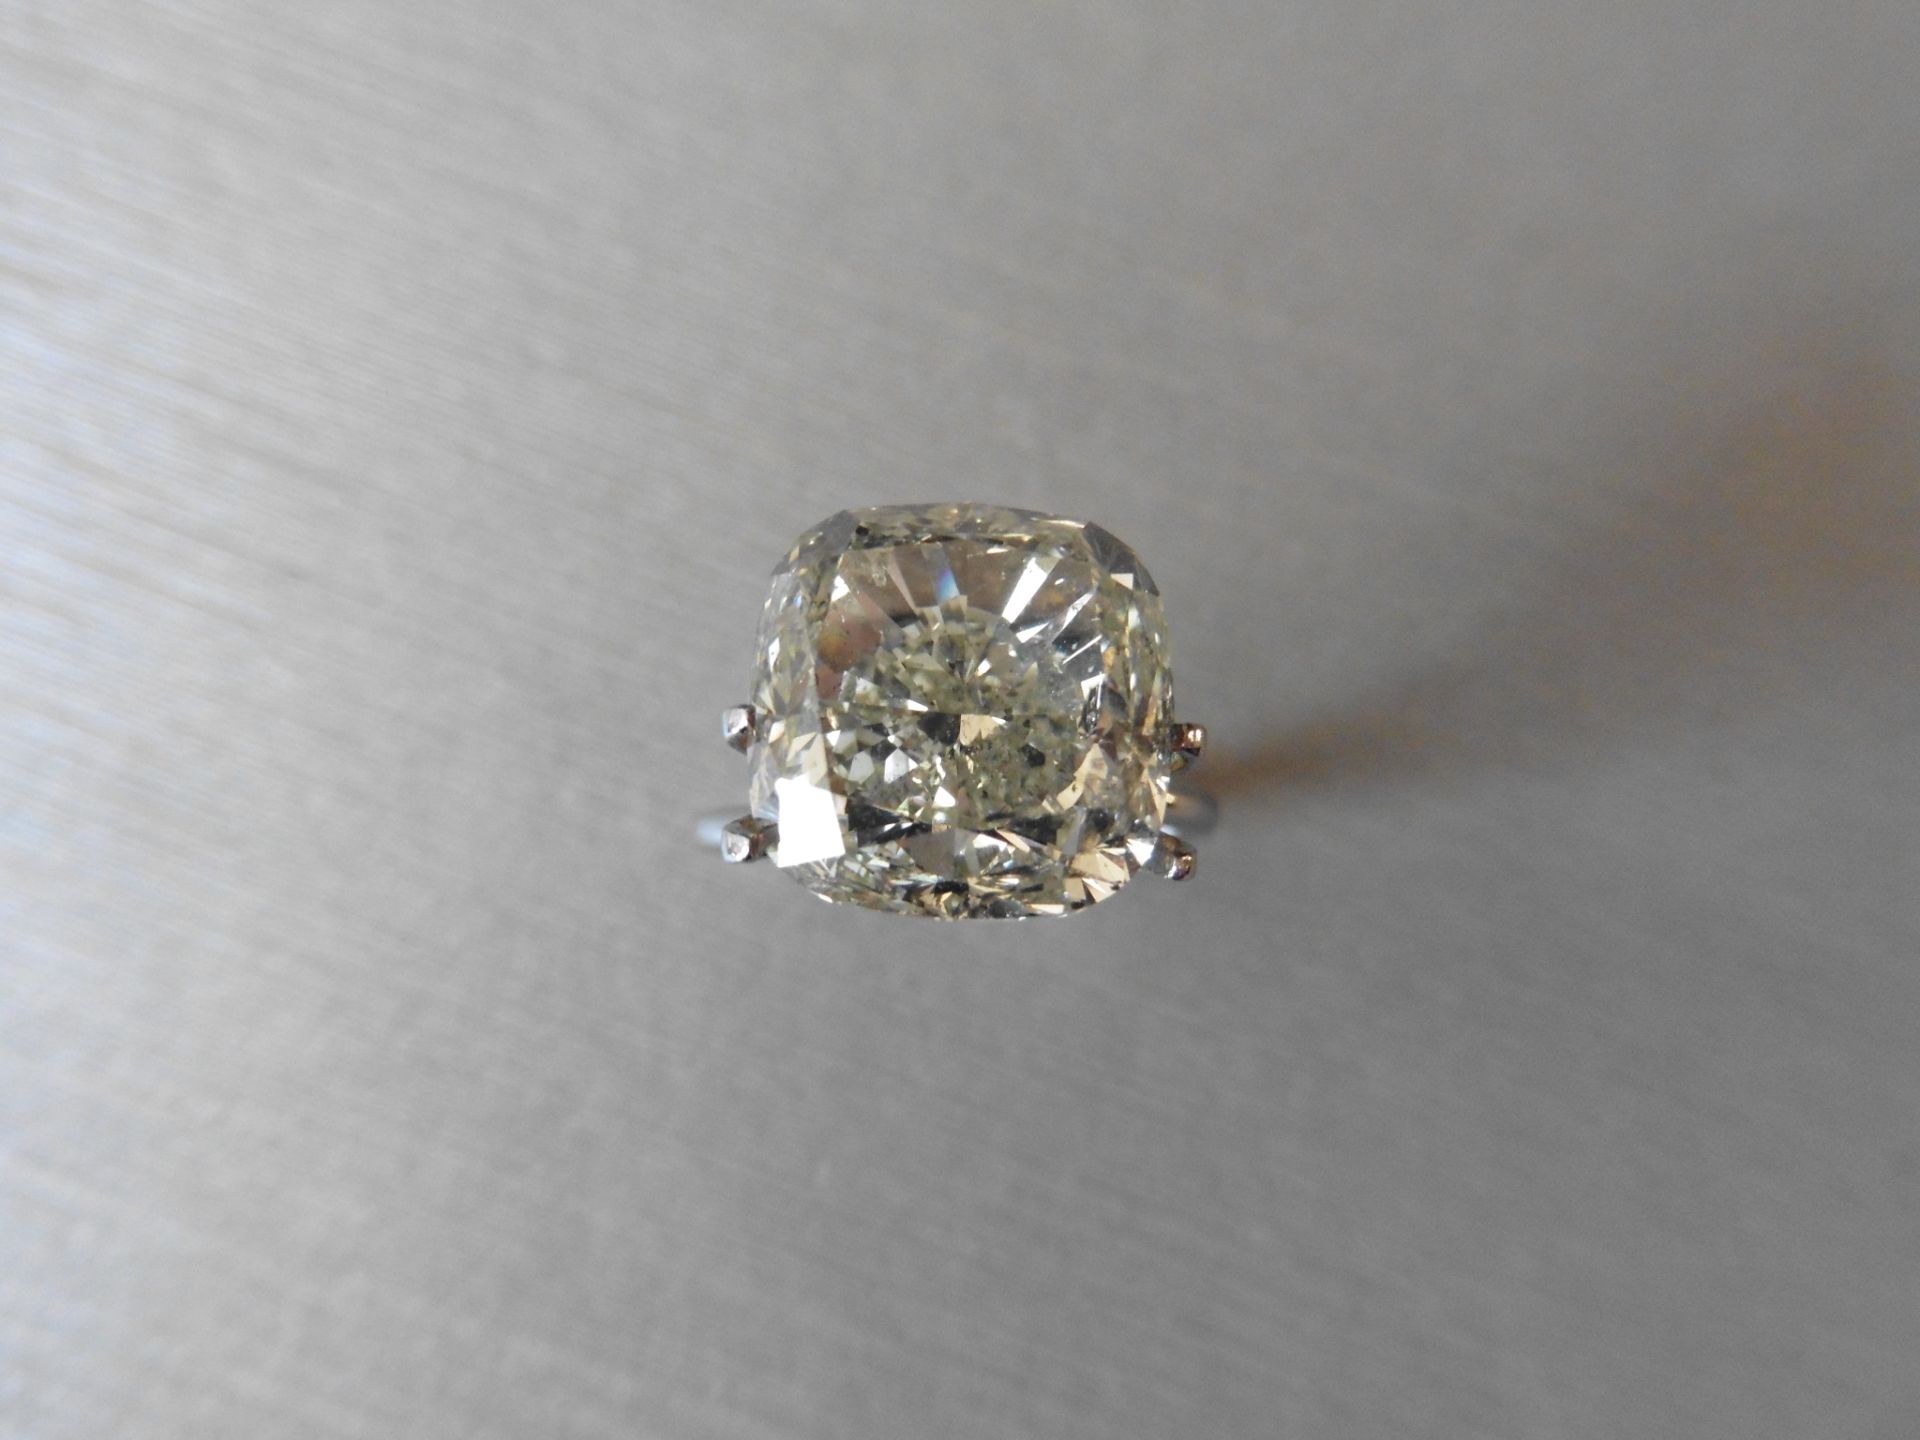 10.10ct single old cut cushion diamond , K colour SI2 clarity. Suitable for mounting in a ring or - Image 2 of 5